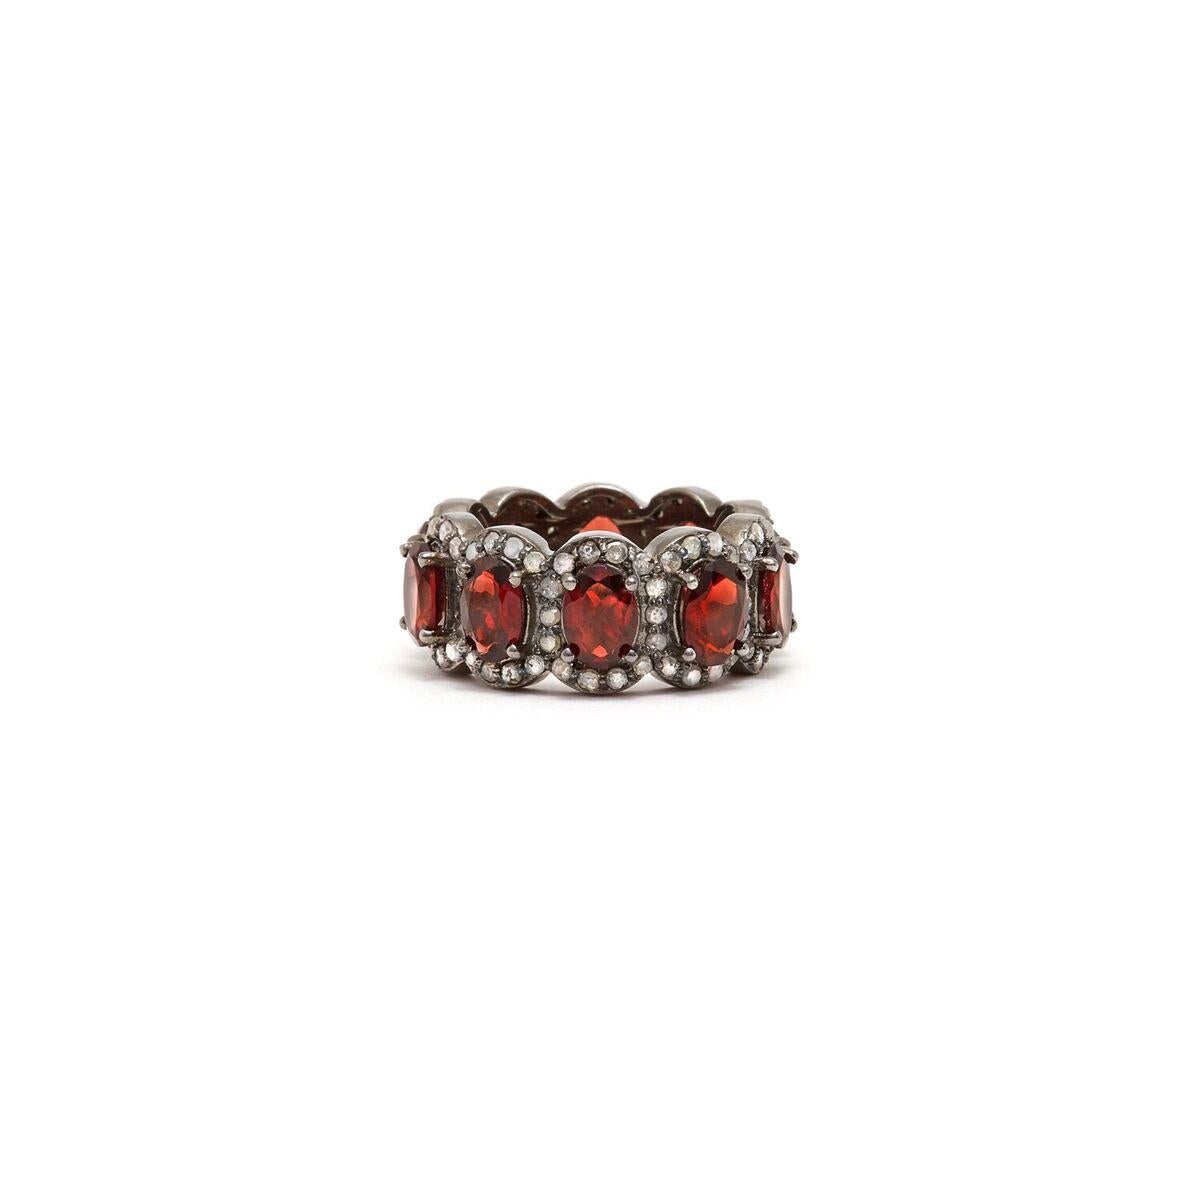 Mesmerizing wine red Garnet baguettes accented with white Diamonds in a blackened silver band reminiscent of an Art Deco Tiara.

- Natural Wine Red Garnet.
- White Diamonds.
- Set in Blackened Oxidized Silver.